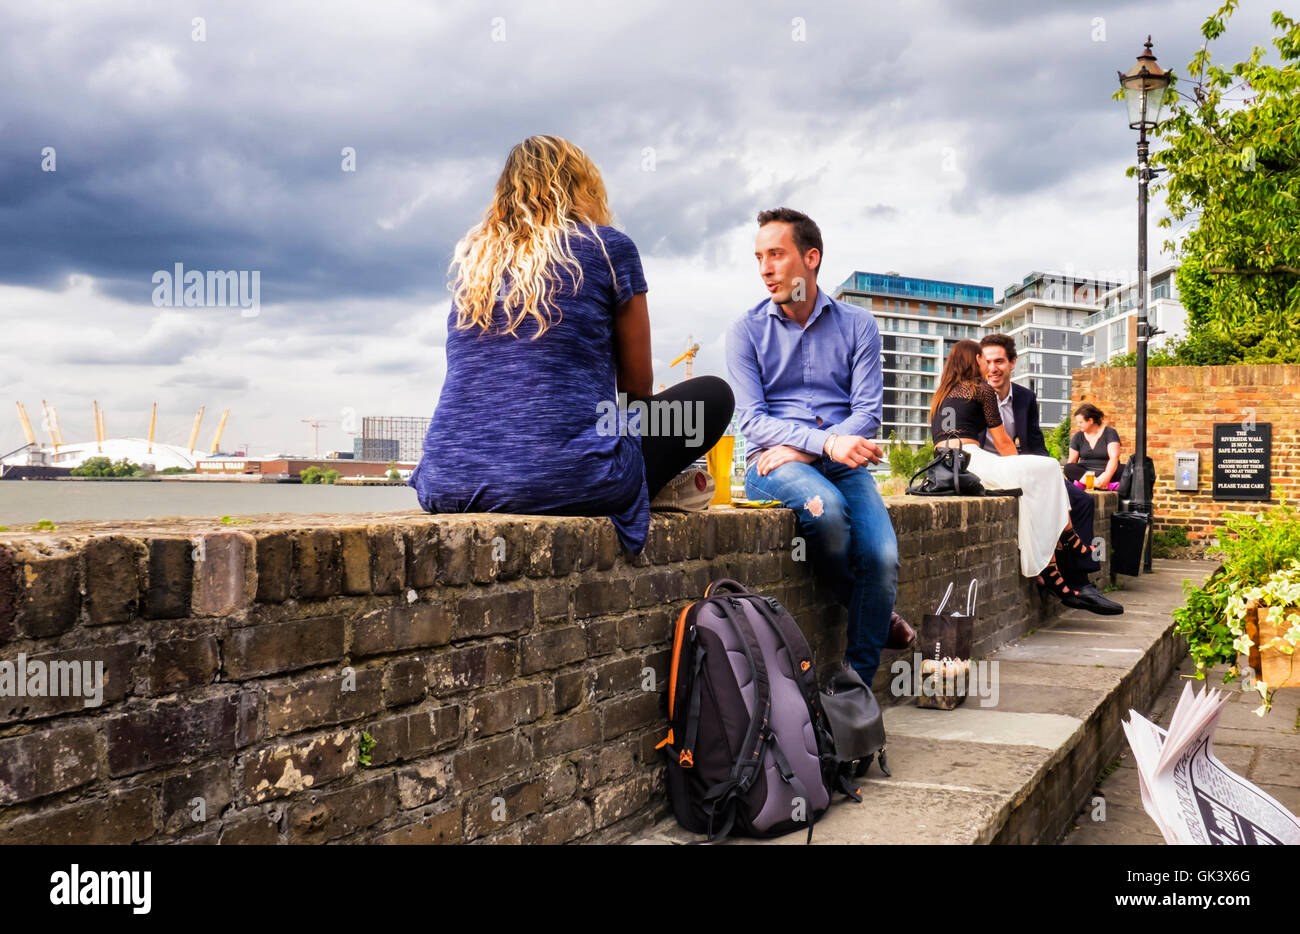 Young couples enjoy a drink after work at riverside pub after work, Greenwich, London Stock Photo